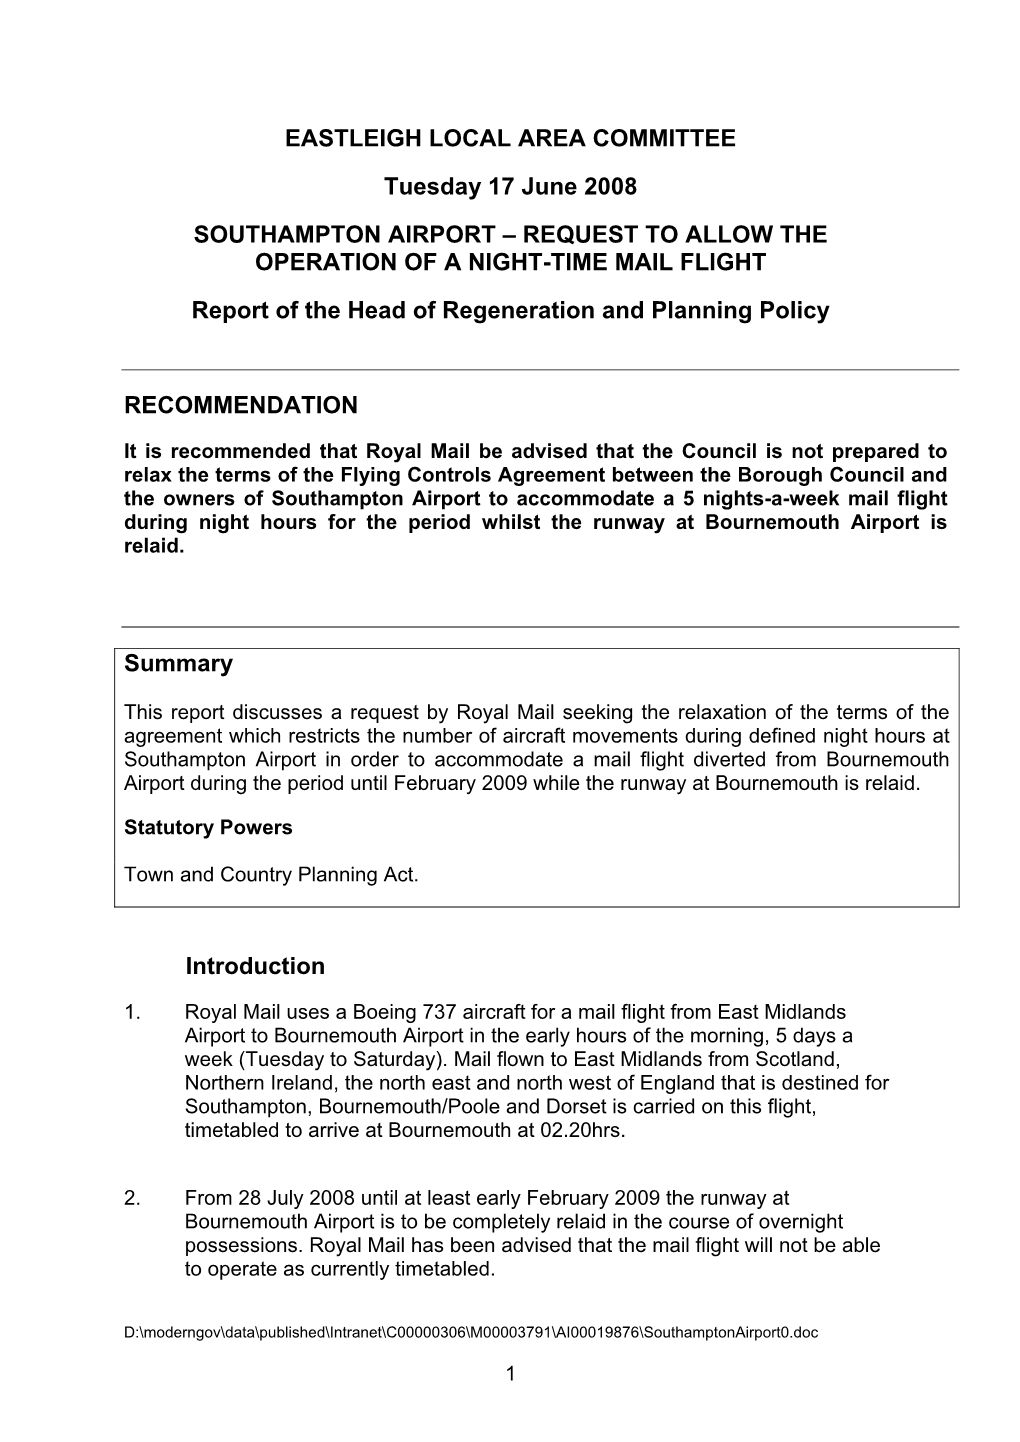 Southampton Airport – Request to Allow the Operation of Night-Time